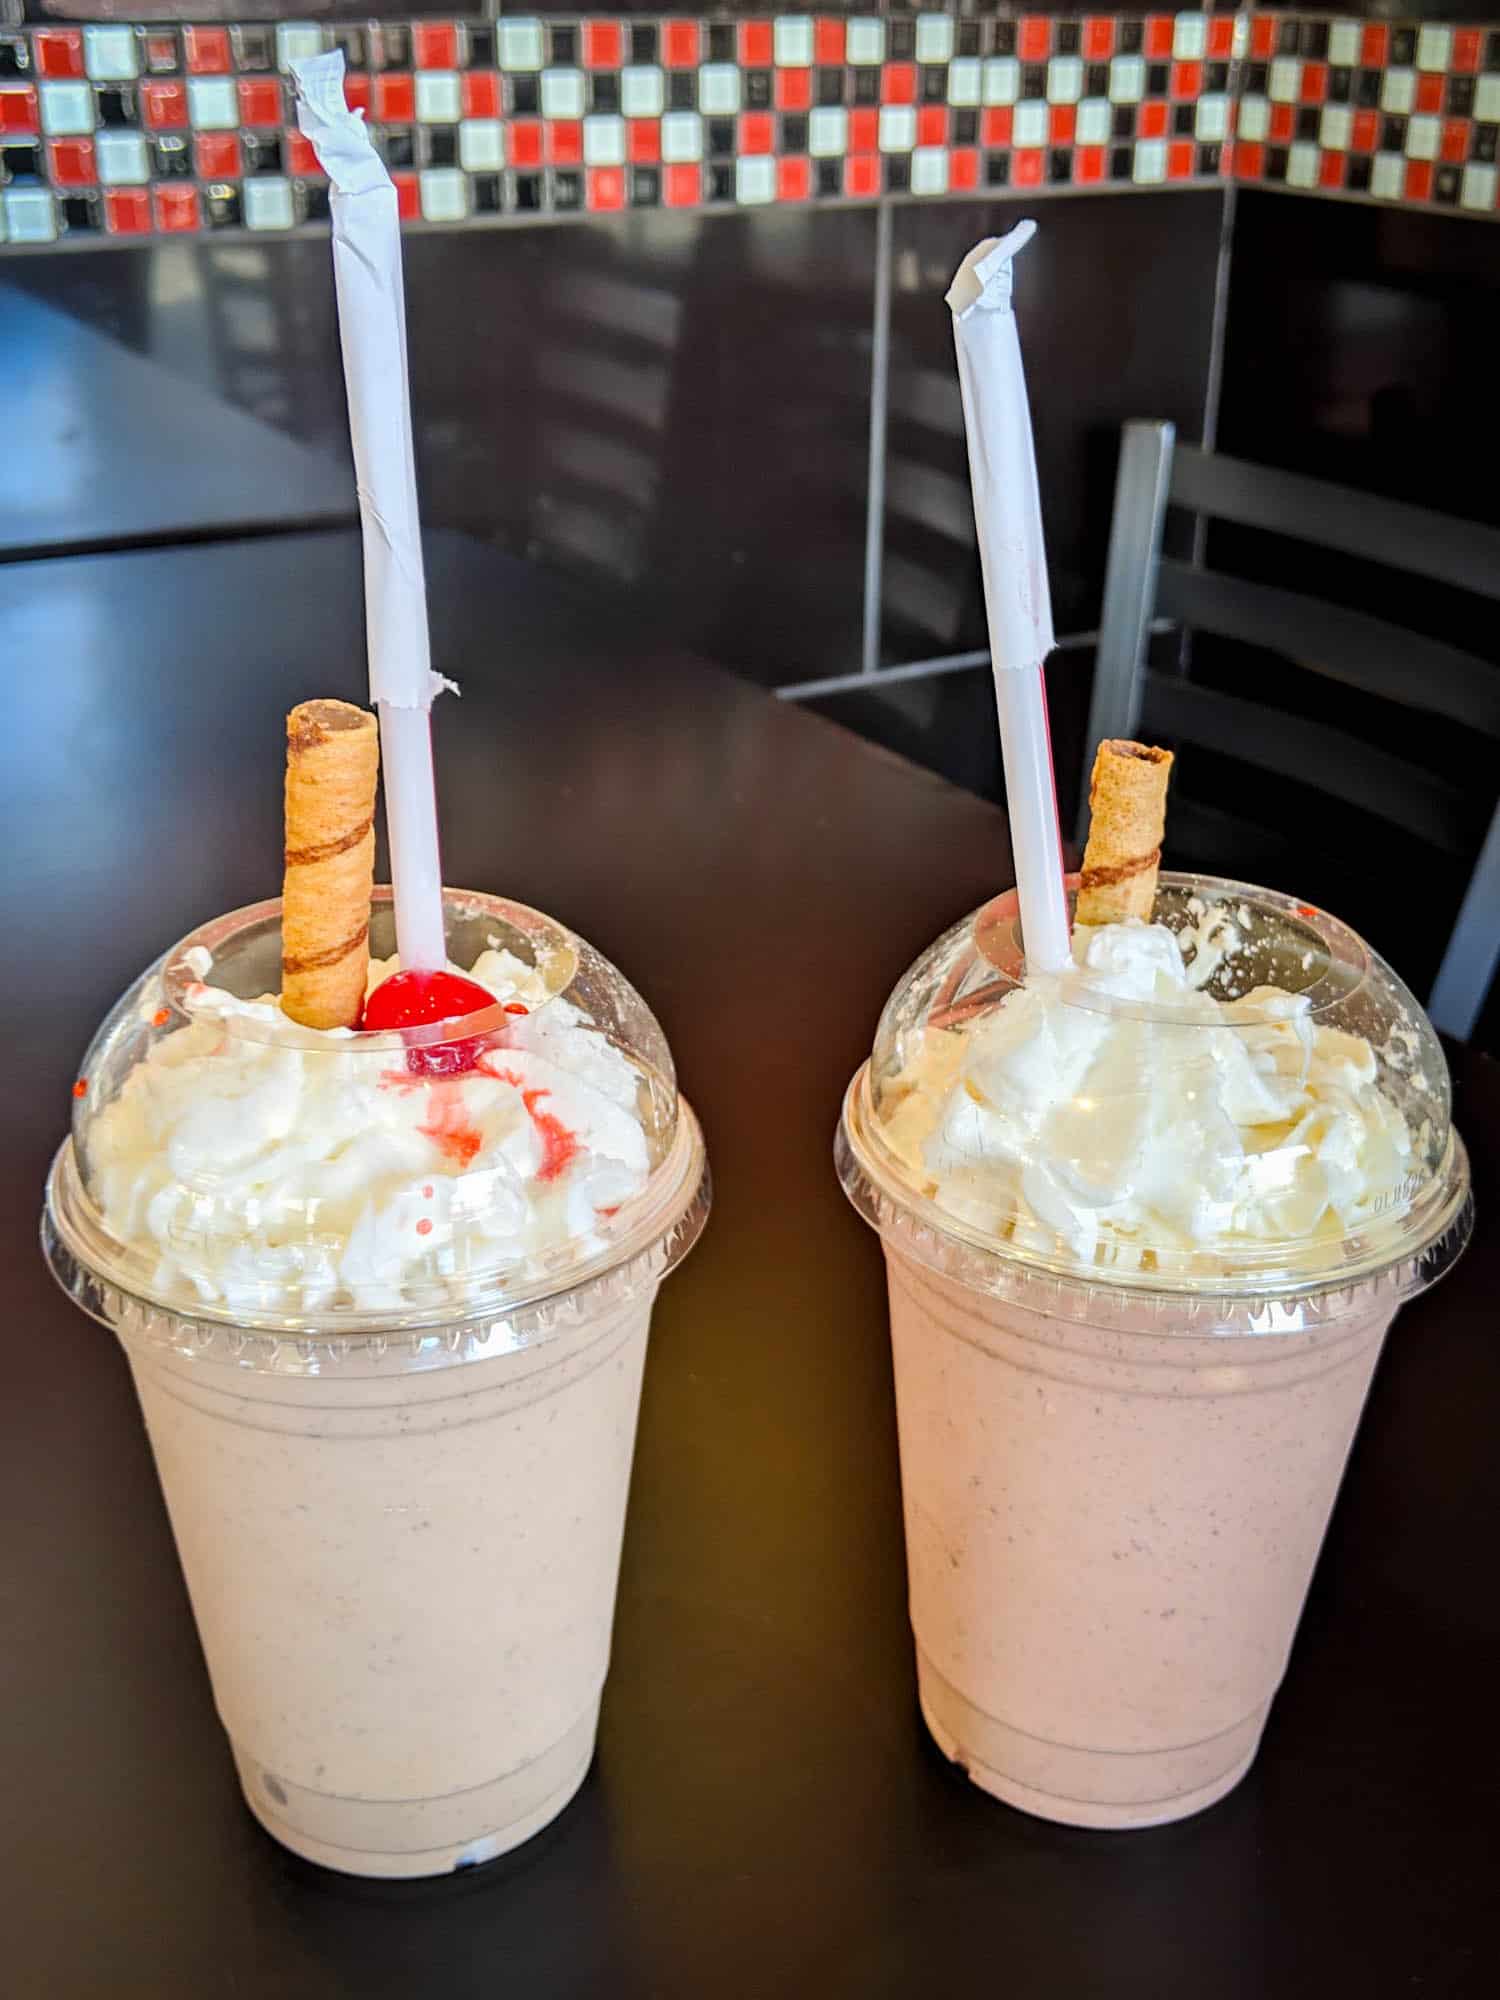 Johnny's Beef & Gyros serves delicious milkshakes. Located in Chicago it is one of the best places to eat on a budget.